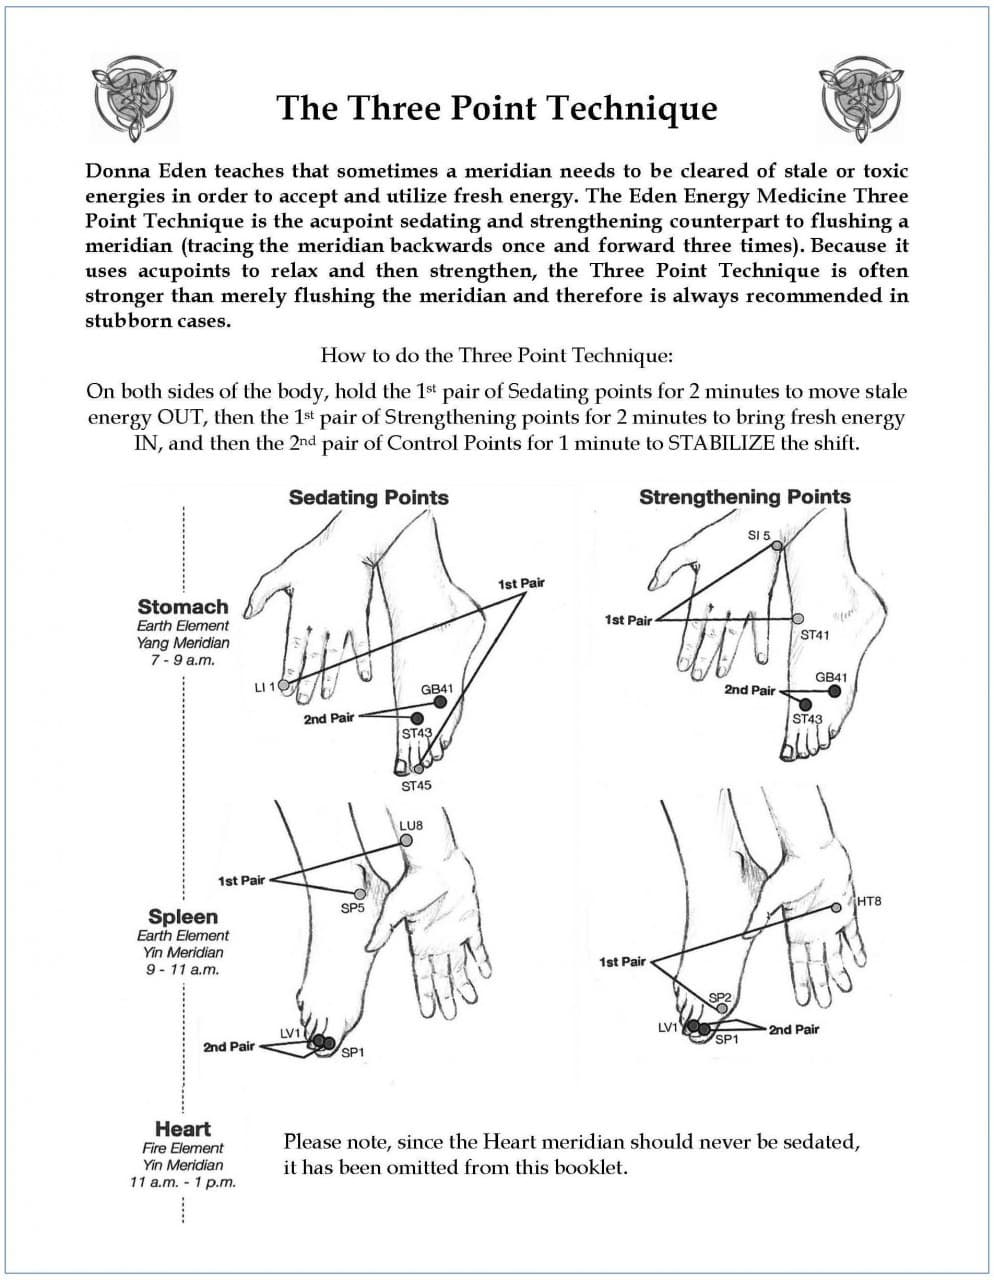 The Three Point Technique Booklet